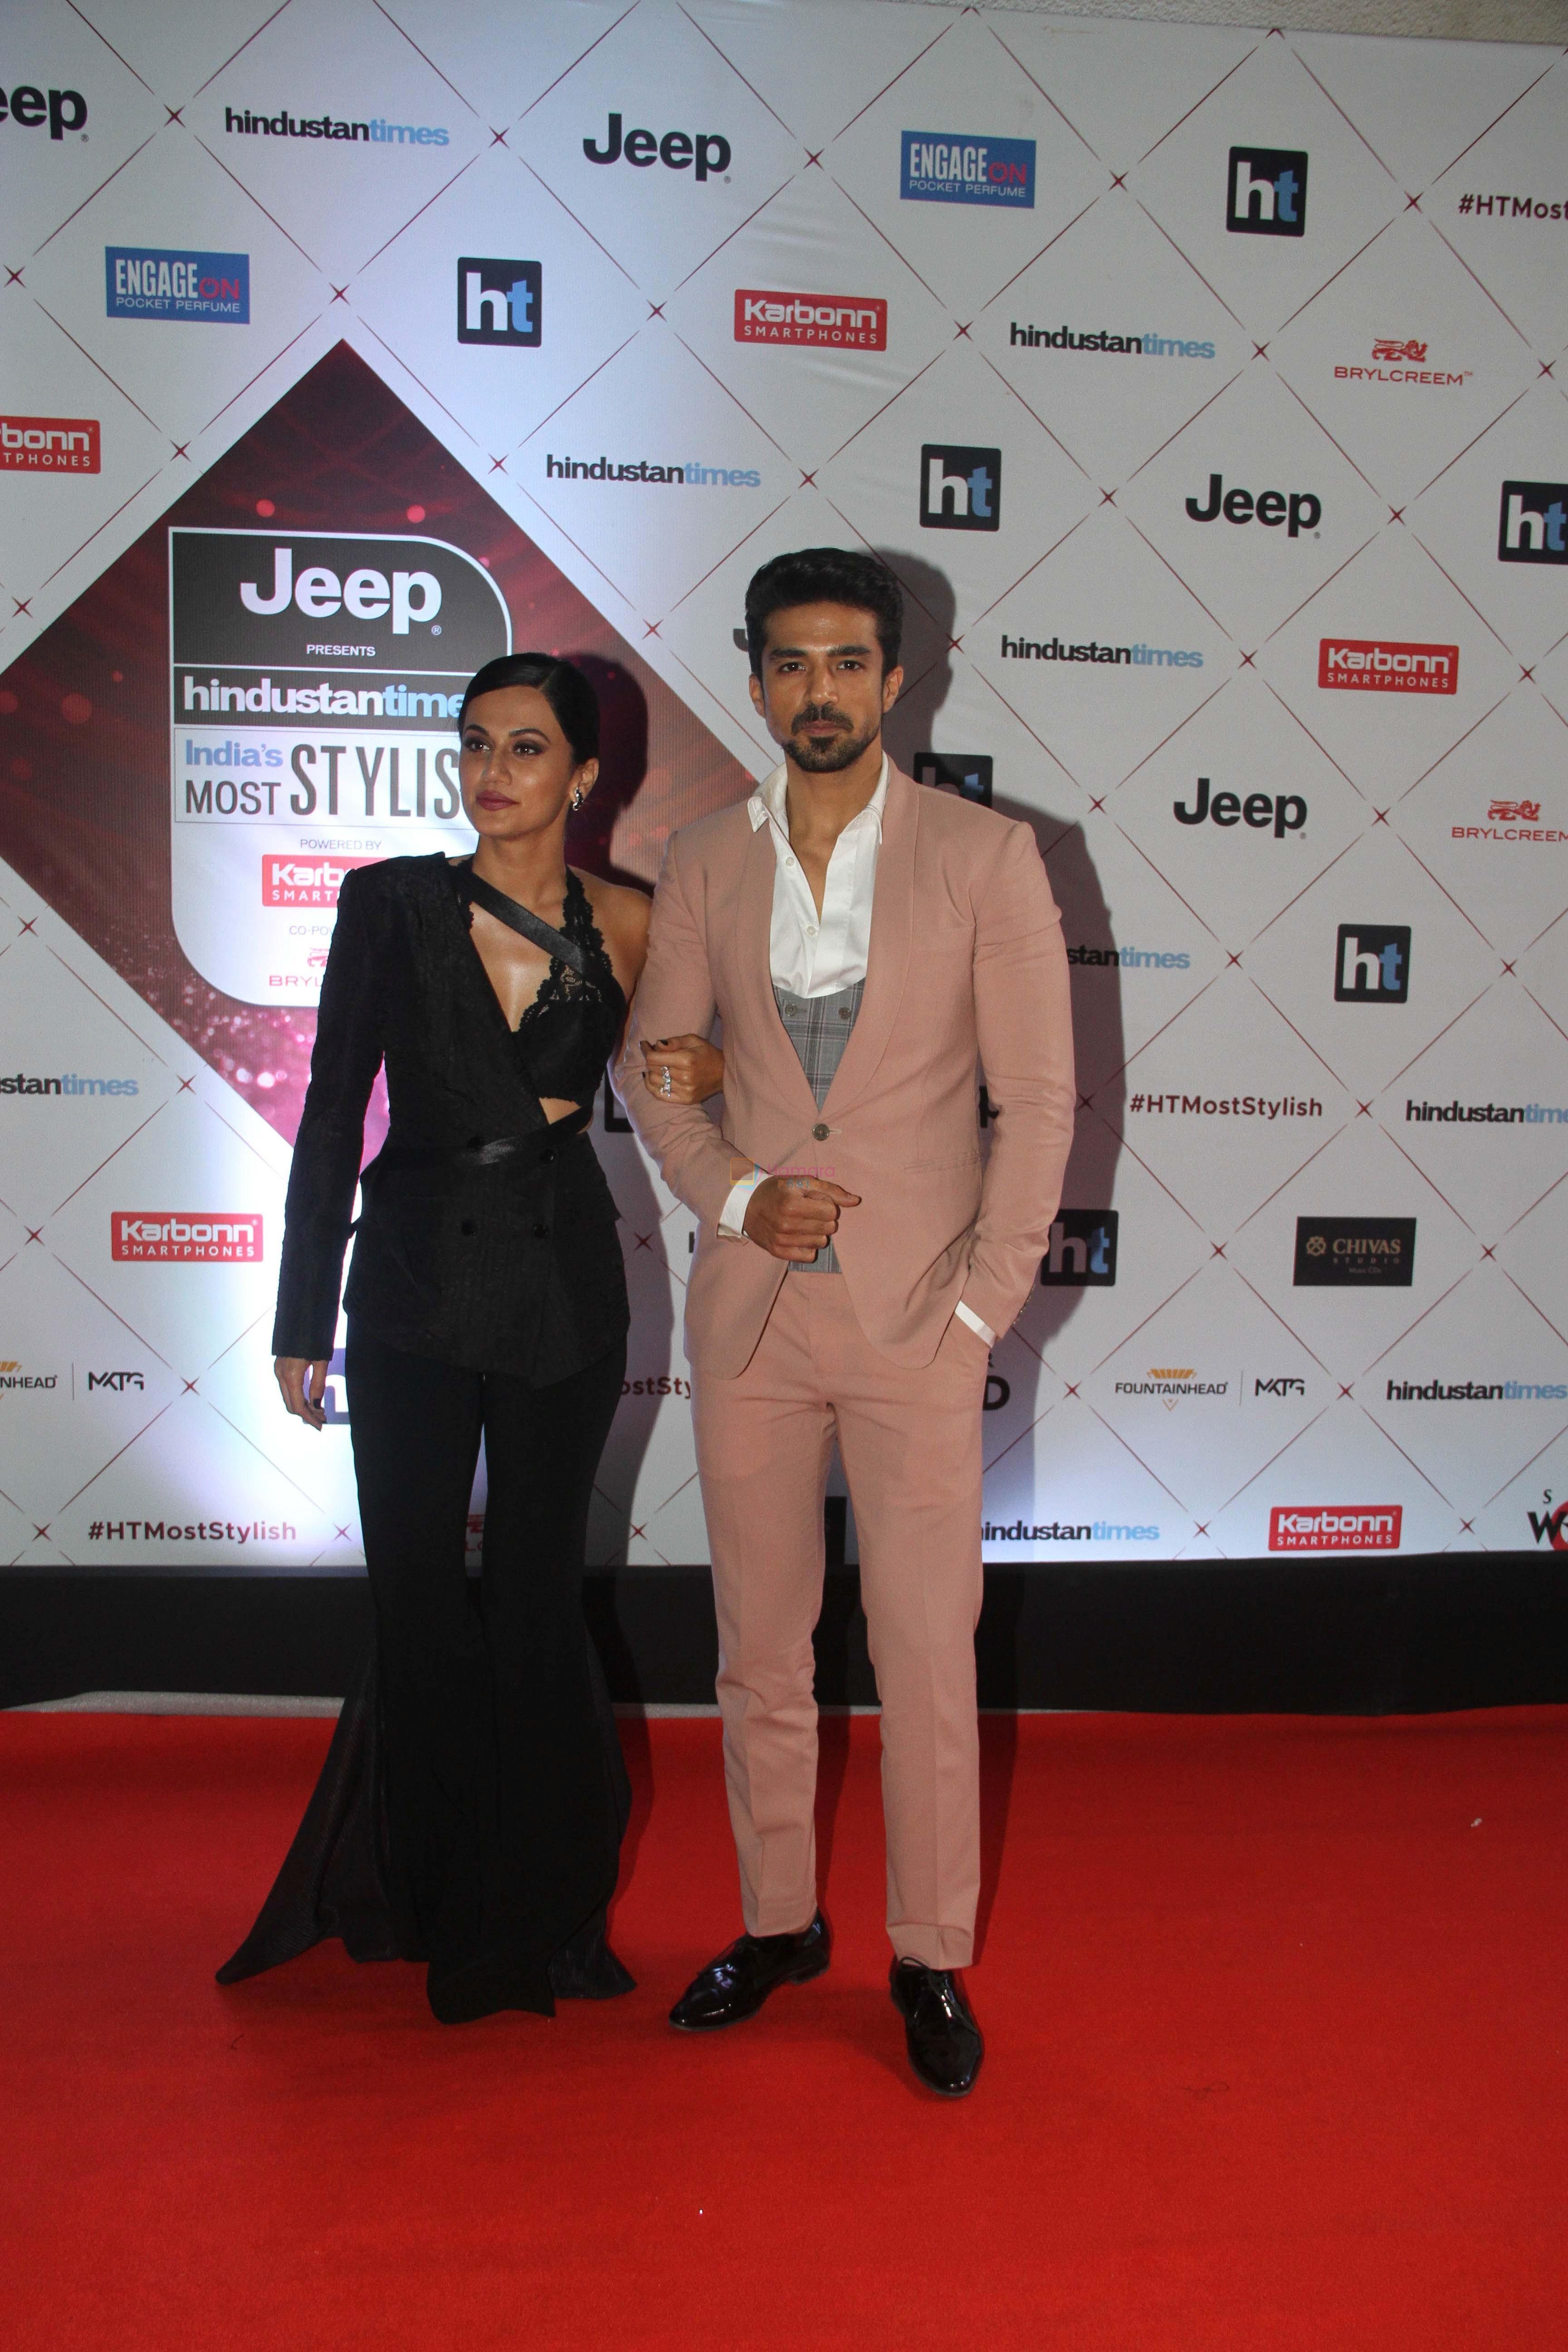 Taapsee Pannu, Saqib Saleem at the Red Carpet Of Ht Most Stylish Awards 2018 on 24th Jan 2018